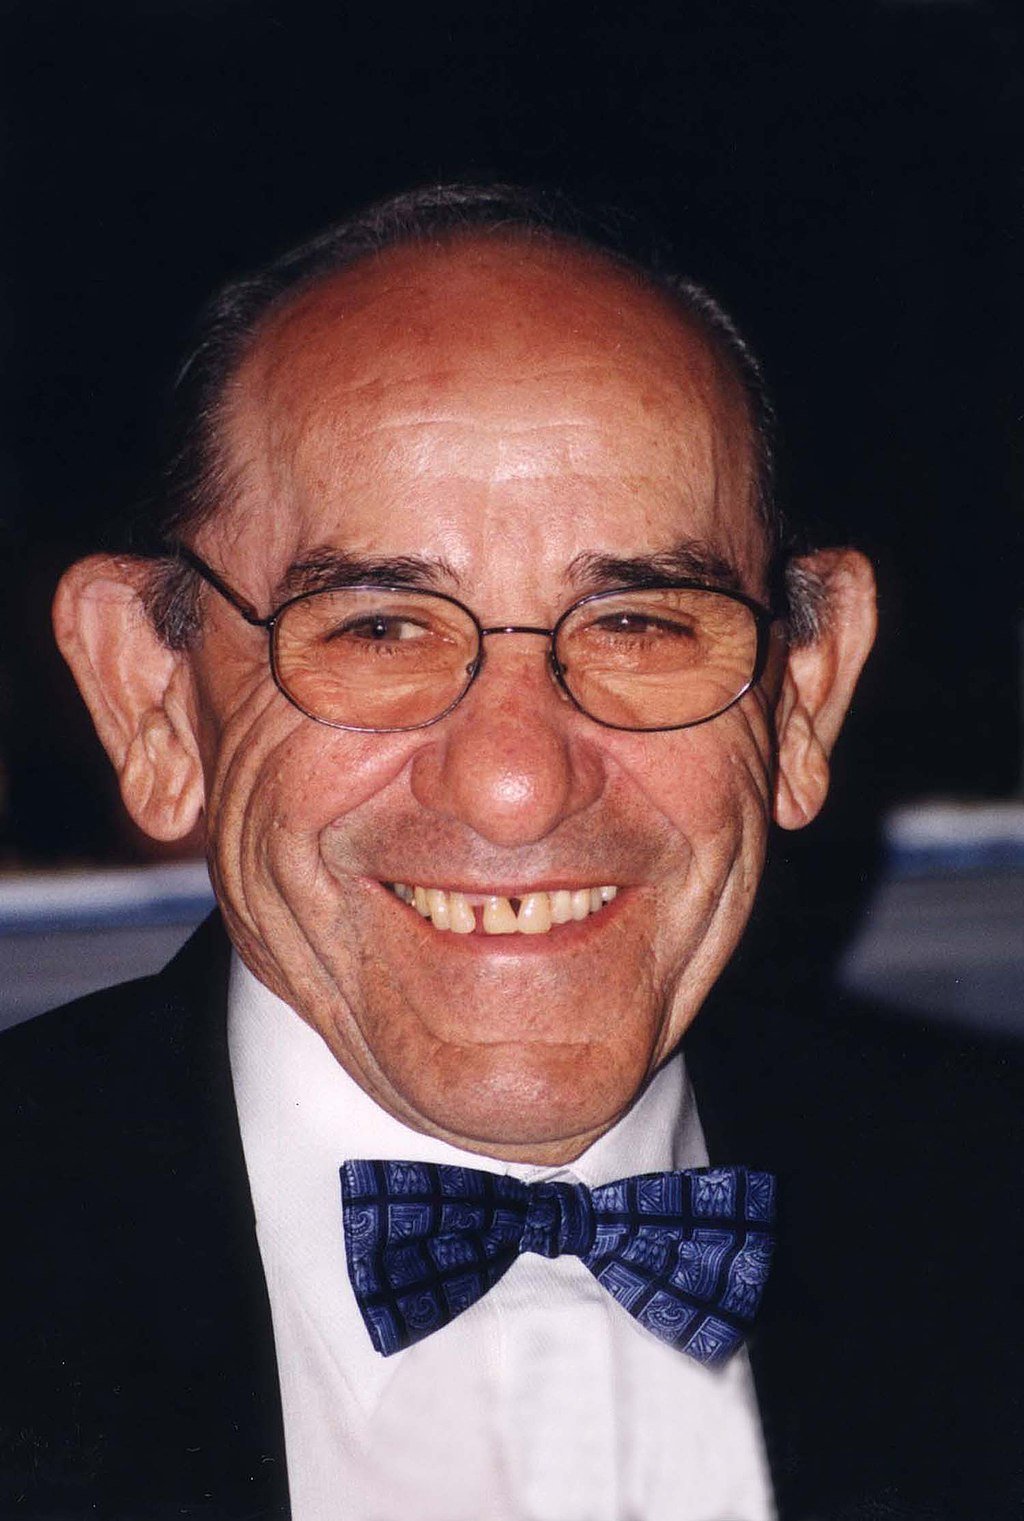 Yogi Berra - King of yogisms and funny quotes